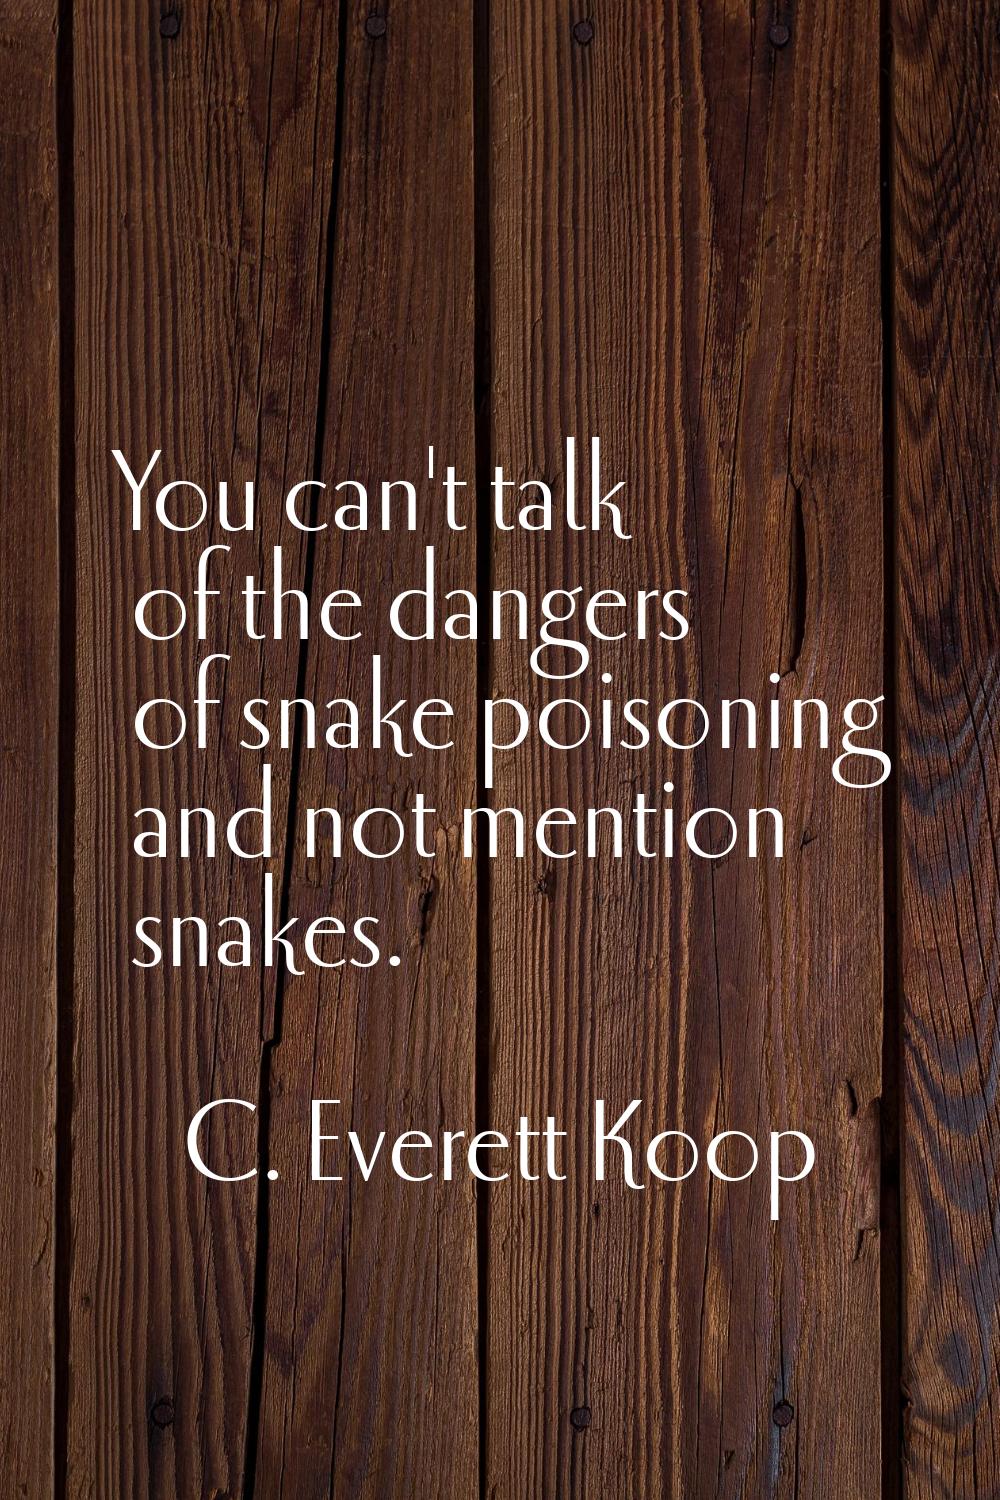 You can't talk of the dangers of snake poisoning and not mention snakes.